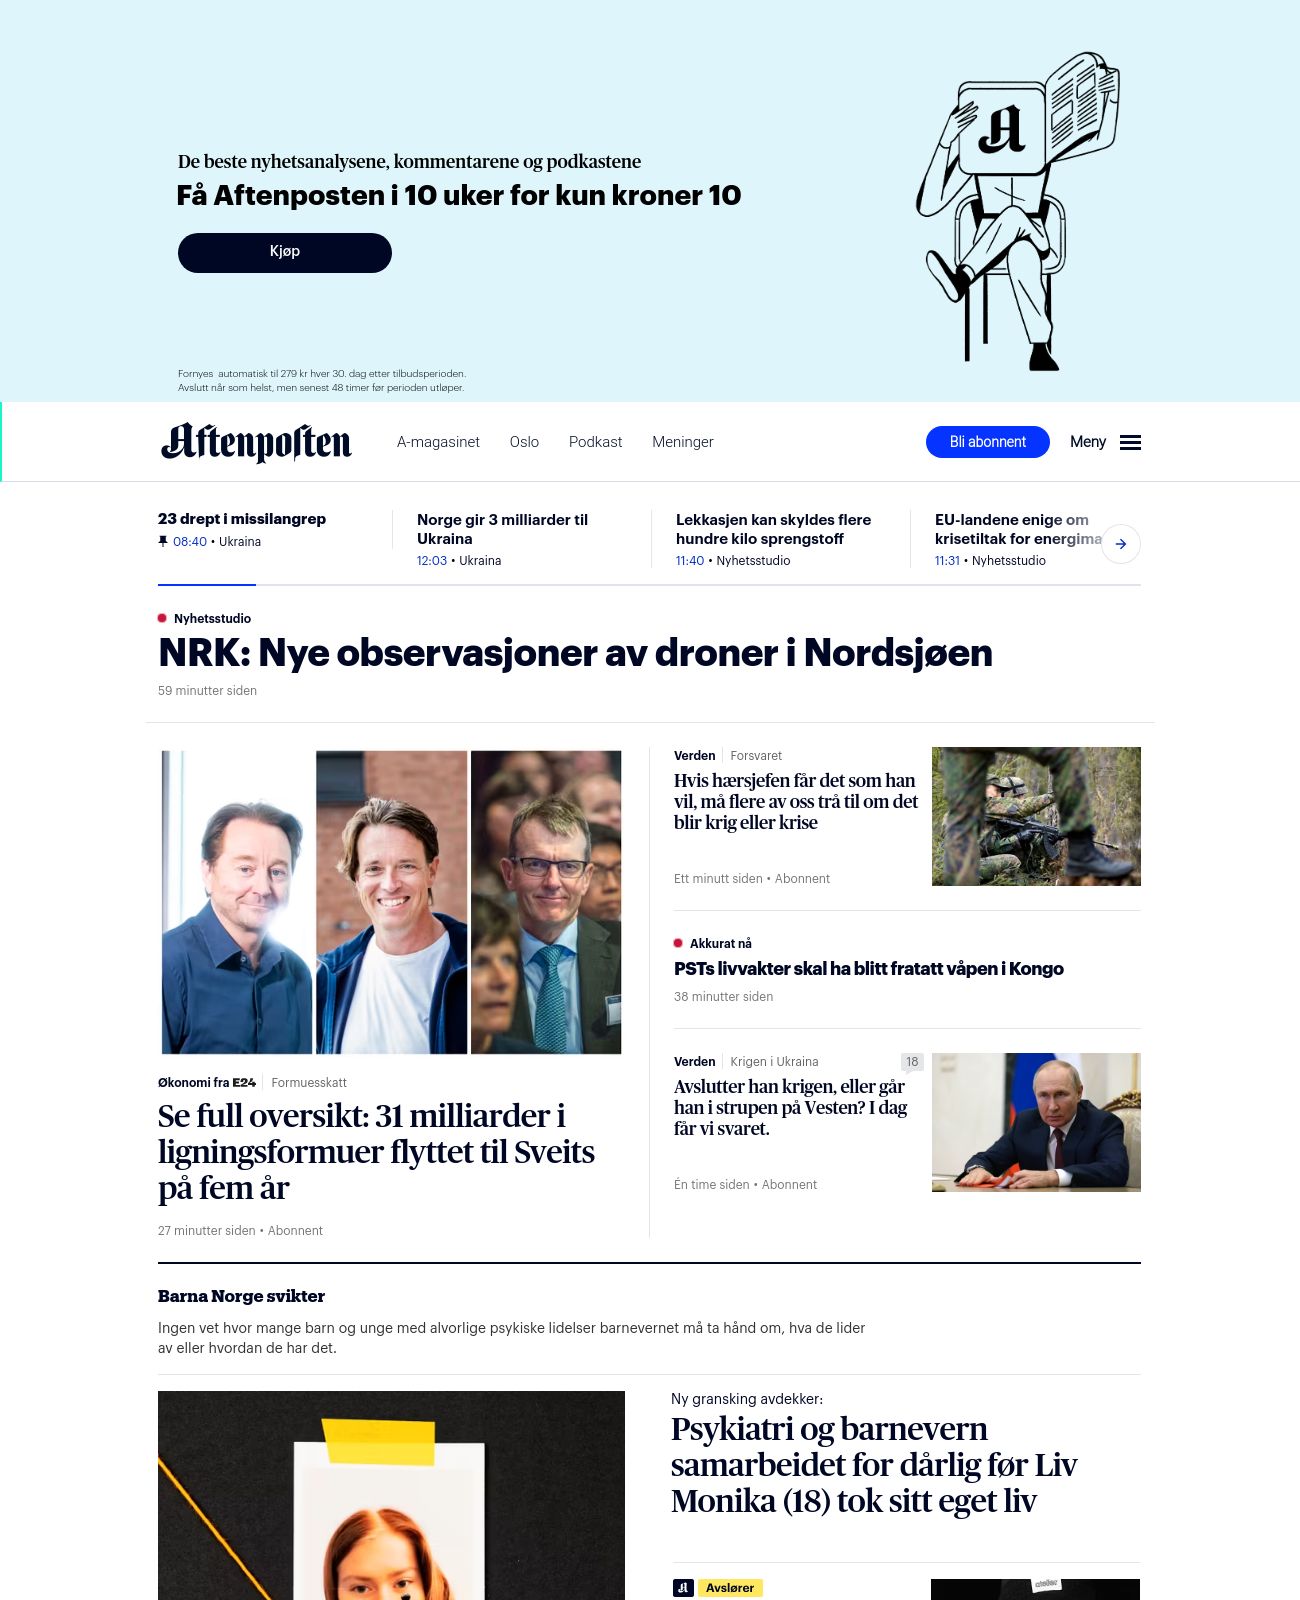 Aftenposten at 2022-09-30 12:53:34+02:00 local time